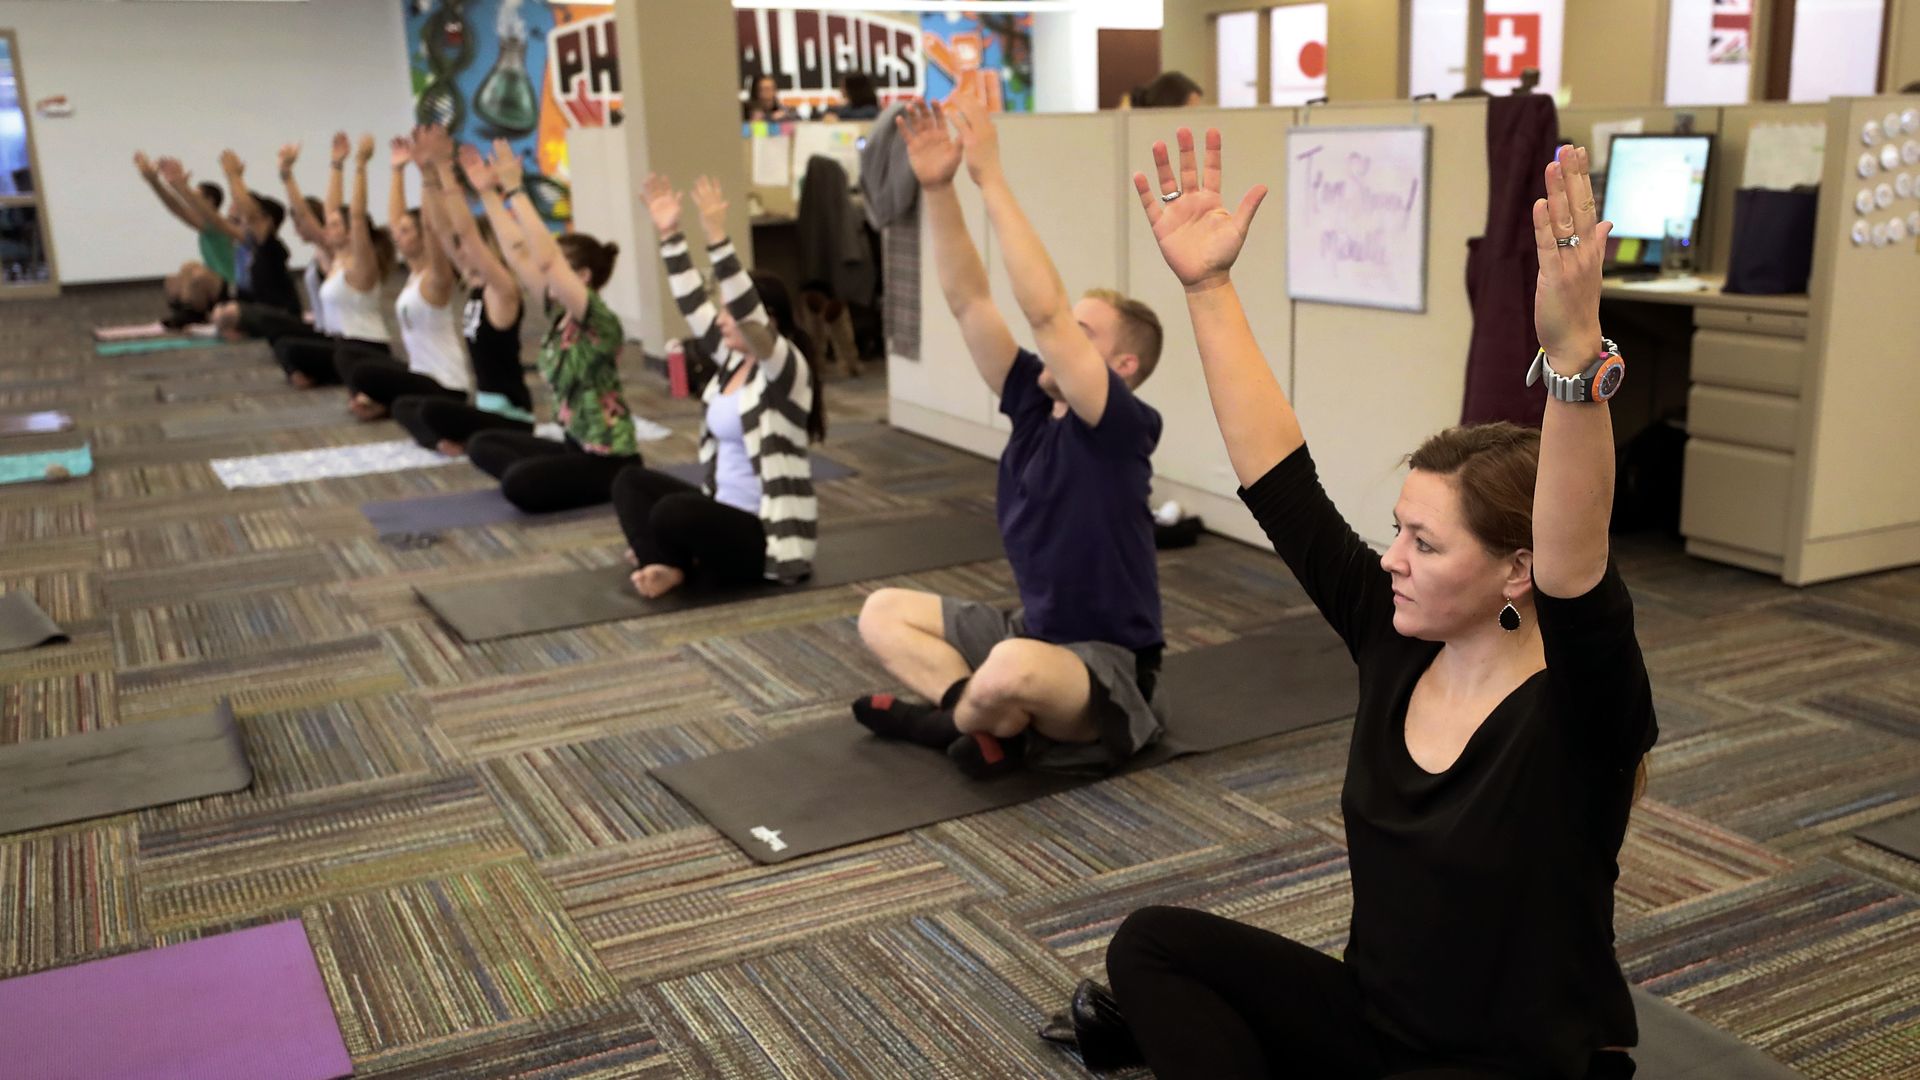 Employees practice yoga in the office.